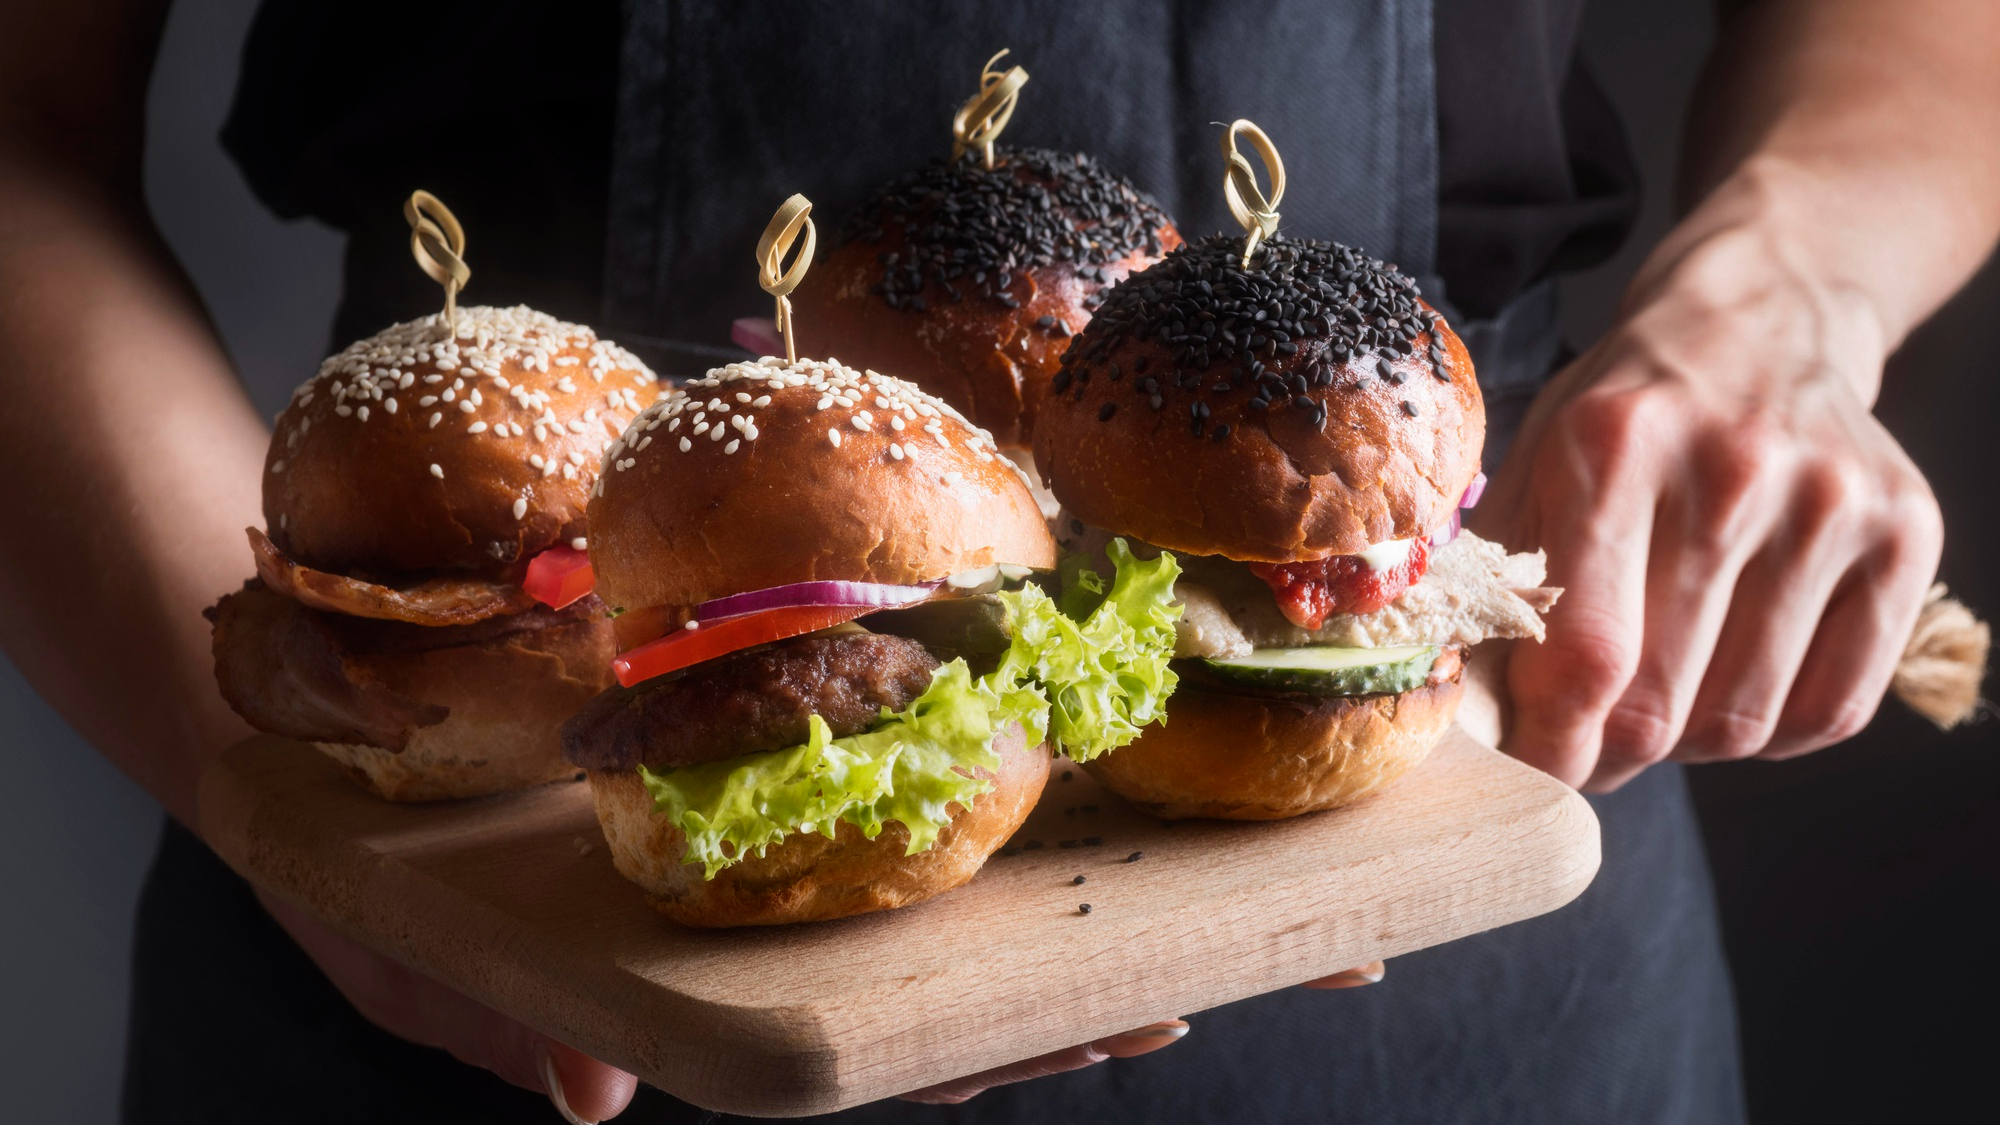 A waiter holding four burgers on a serving board | Source: Freepik